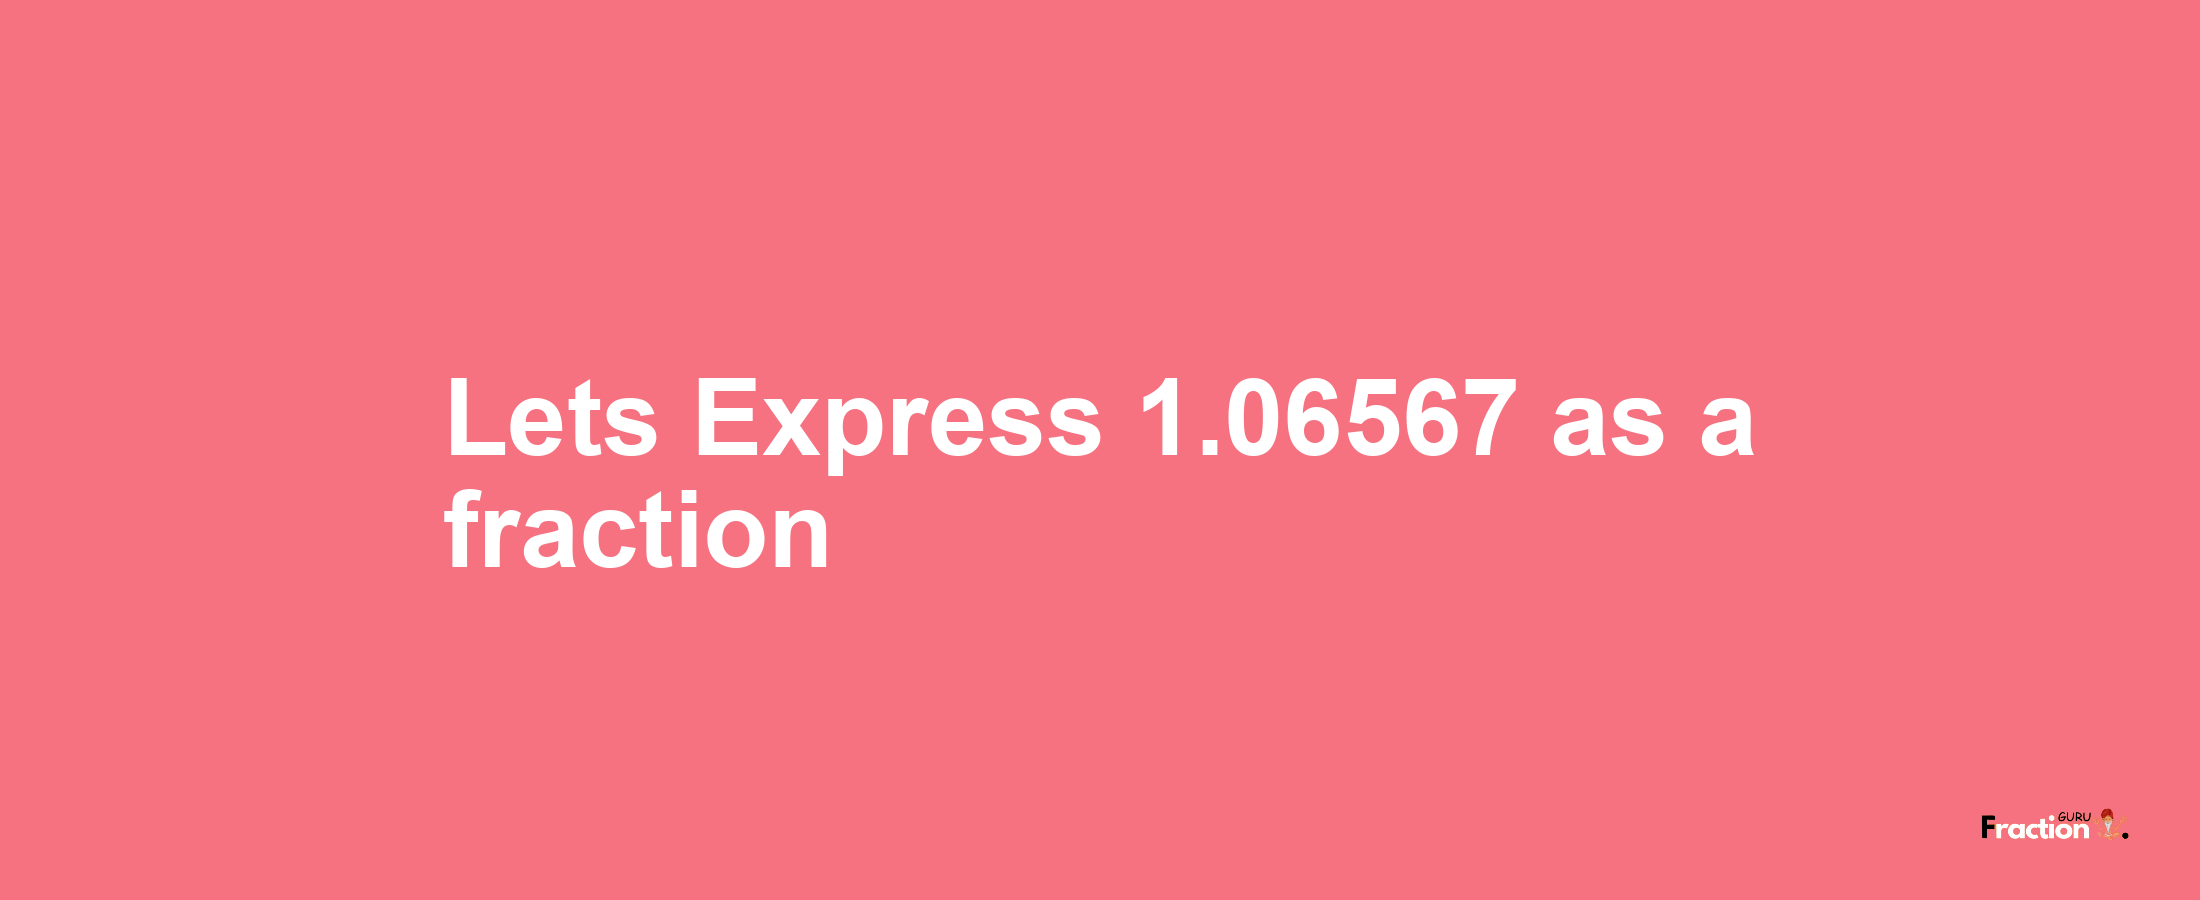 Lets Express 1.06567 as afraction